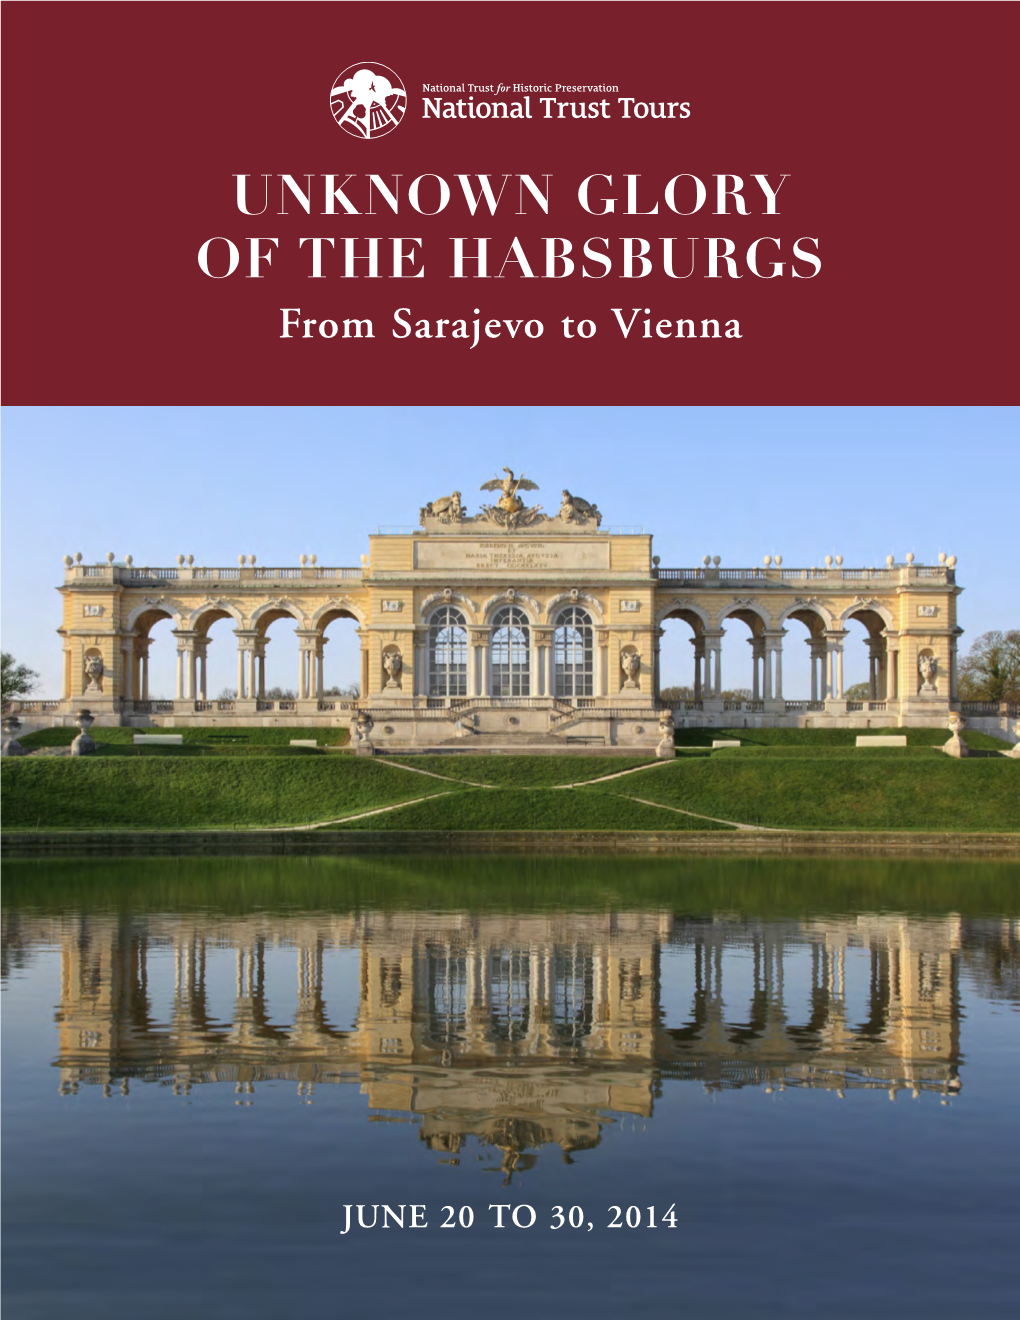 UNKNOWN GLORY of the HABSBURGS from Sarajevo to Vienna